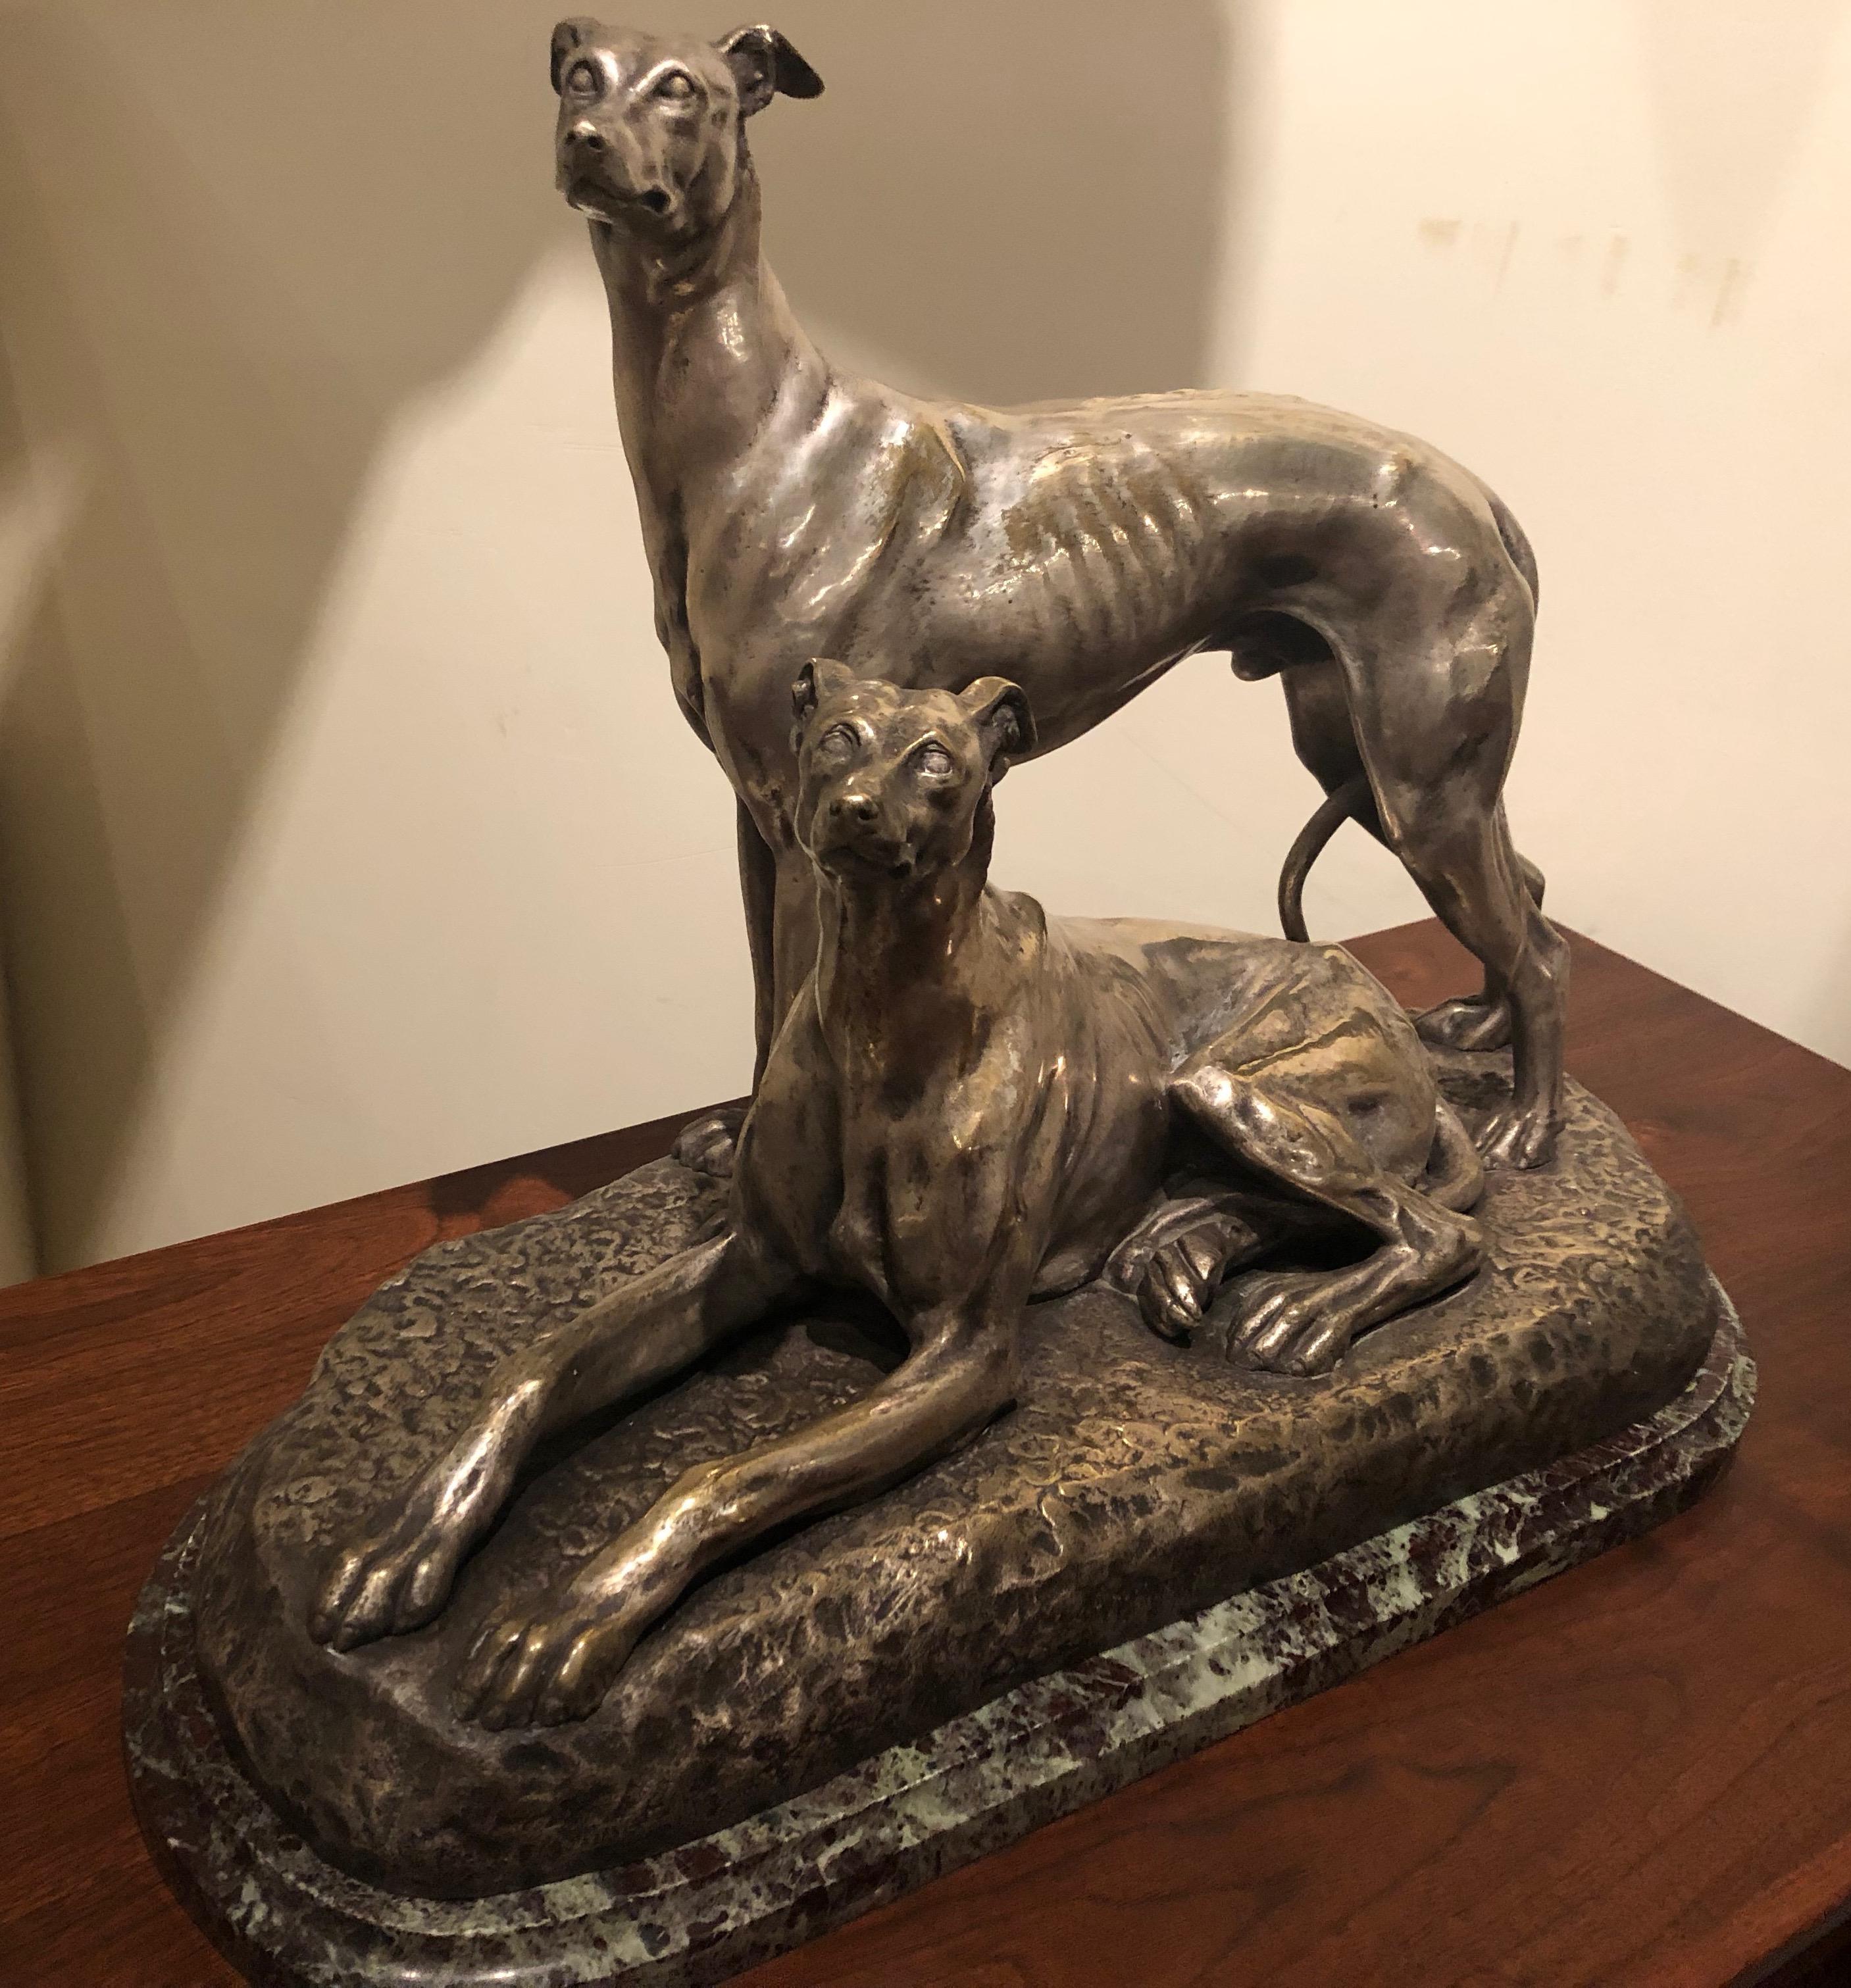 Two Greyhound dogs, a nickeled bronze sculpture by French artist Suzanne Bizard. Stylized figural and accurate rendering portraying a pair of greyhound dogs relaxed in situ. Stunning quality showing the many physical characteristics of this breed: